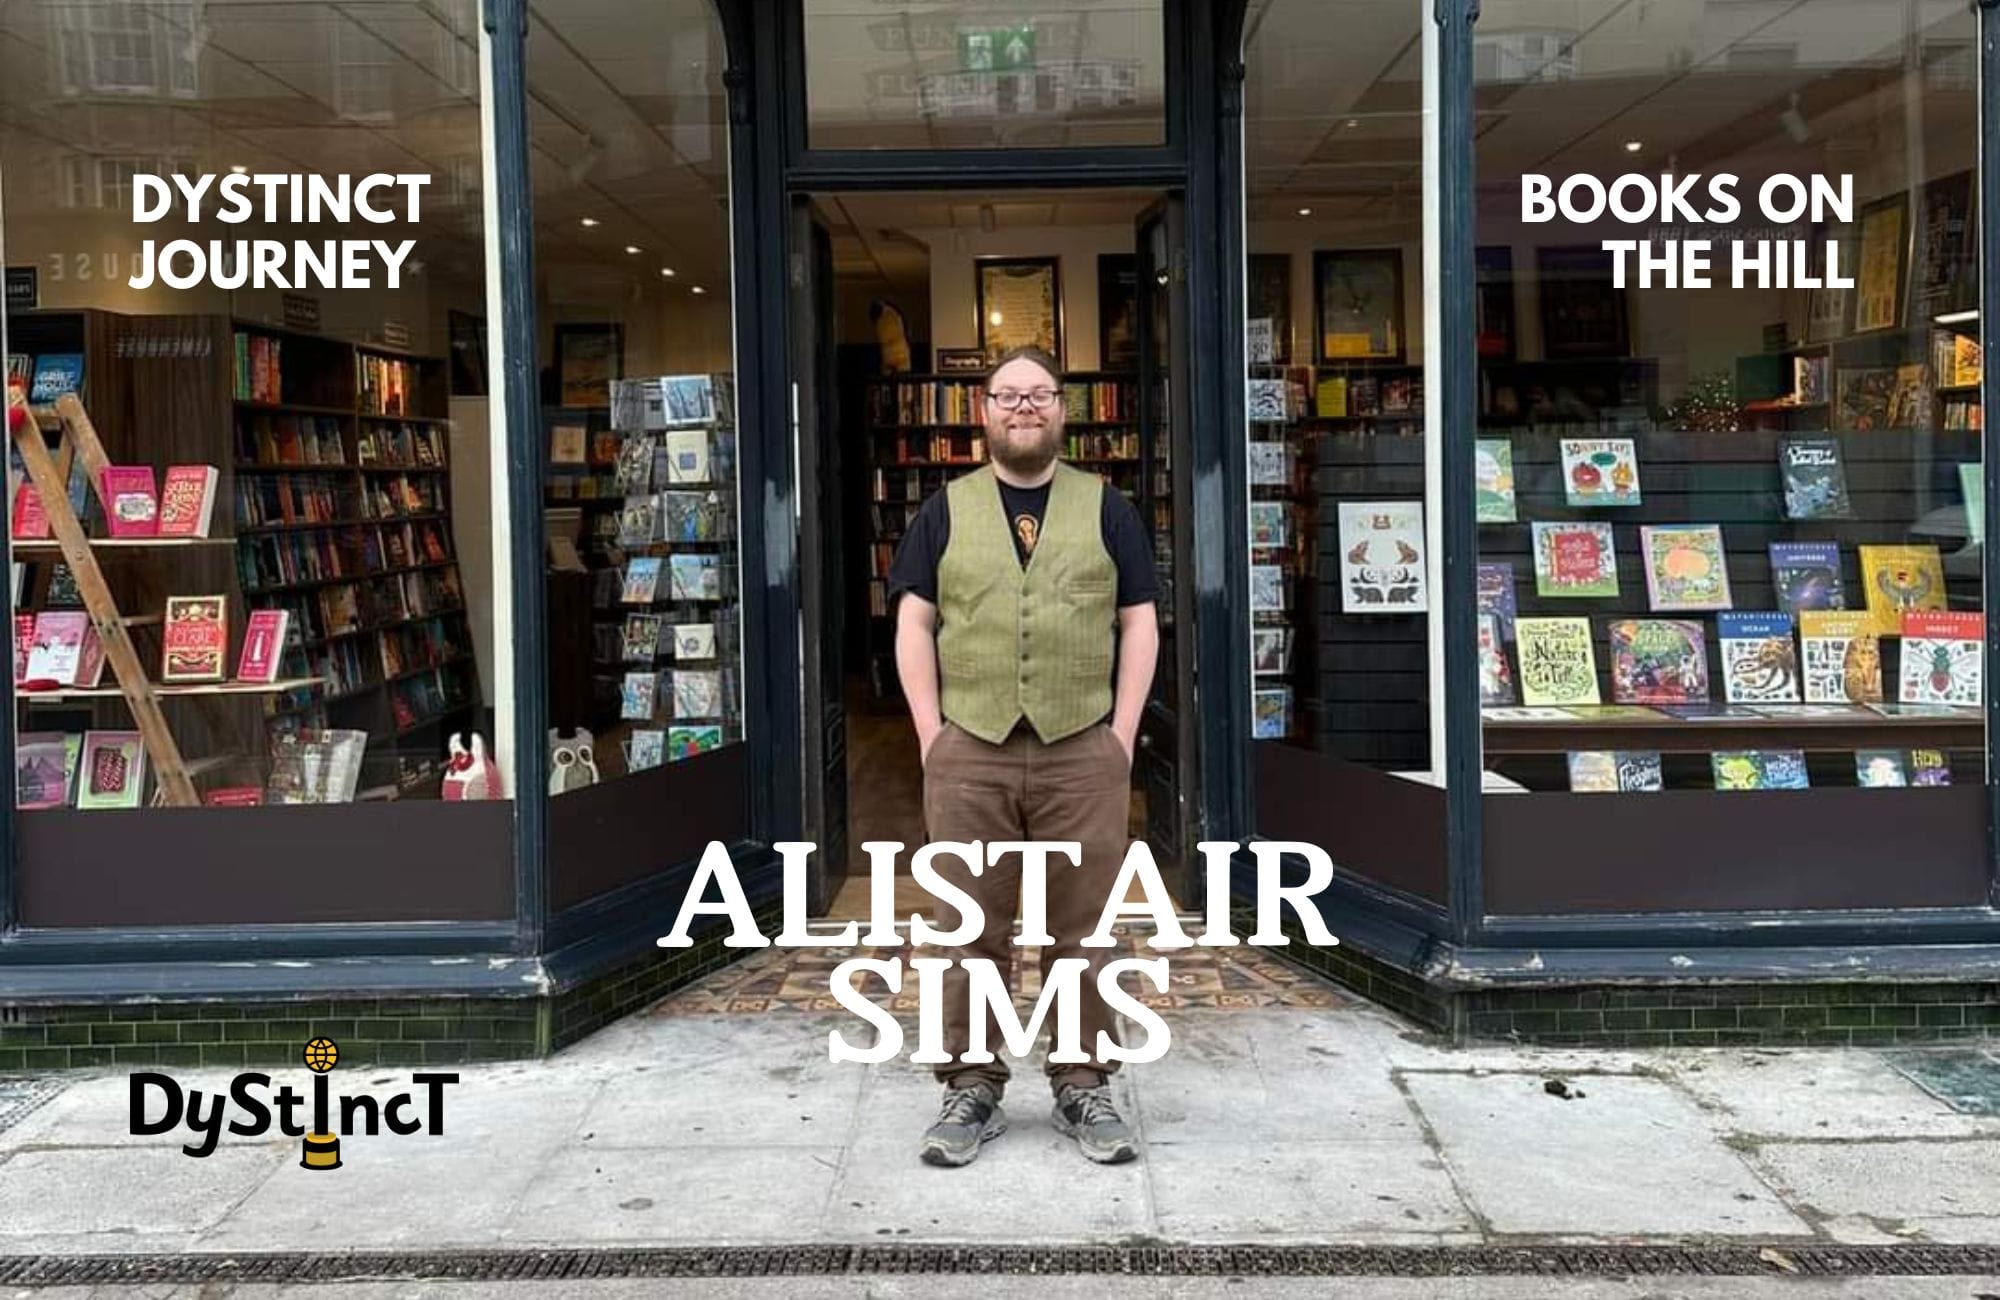 Issue 20: Dystinct Journey of Alistair Sims